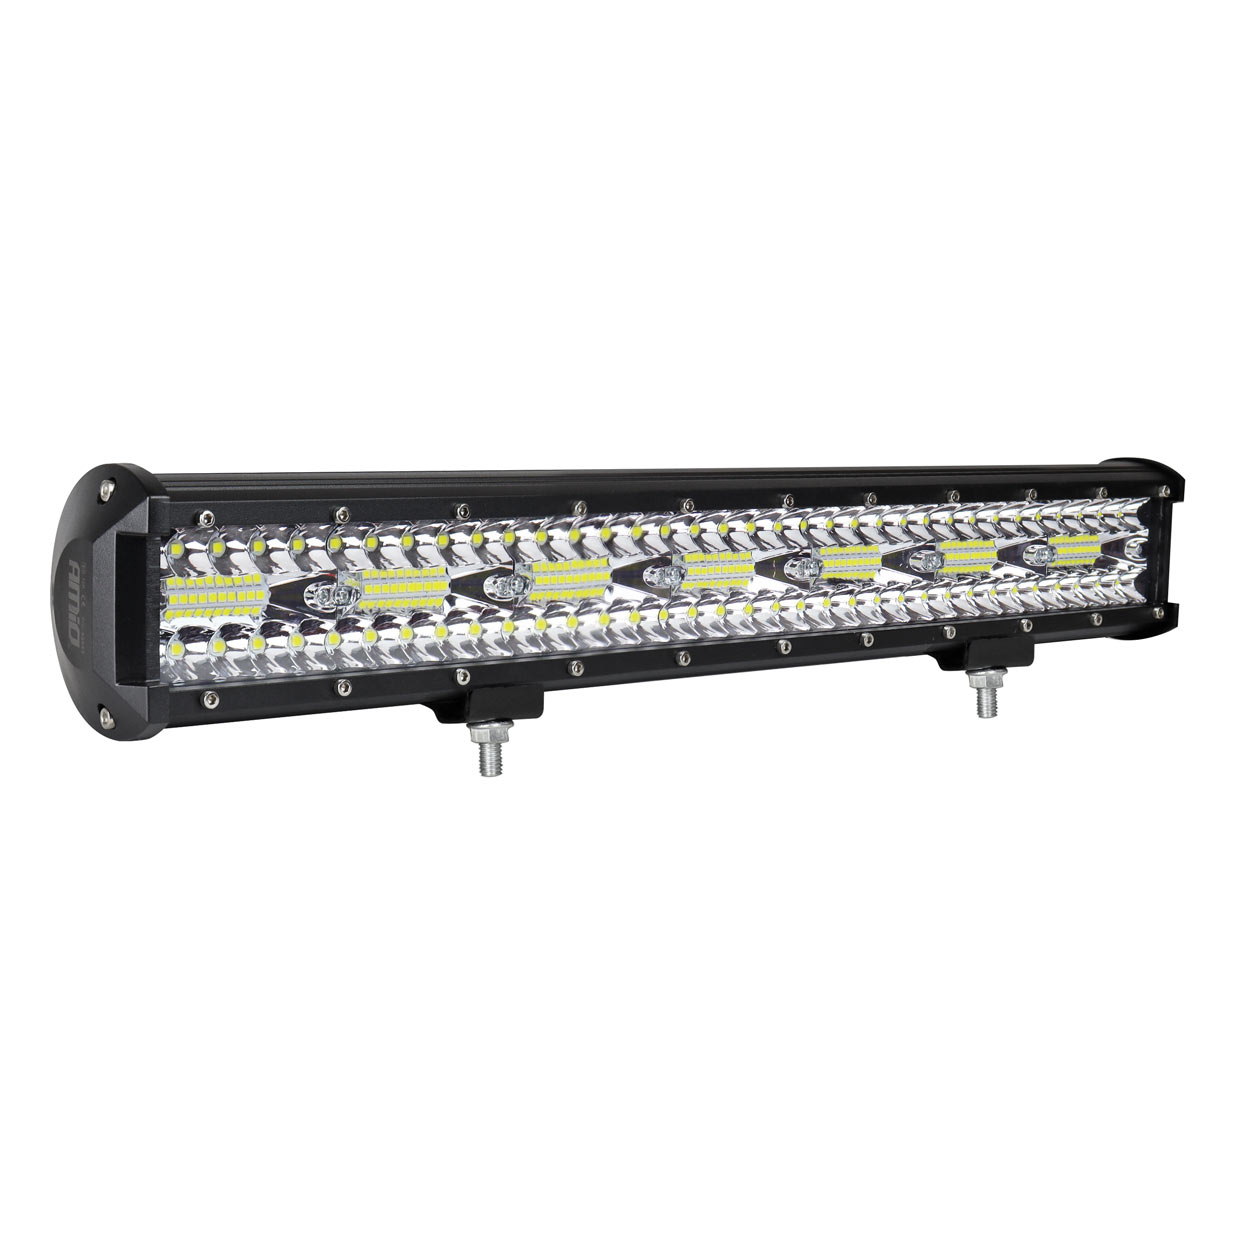 02542/AM ΠΡΟΒΟΛΕΑΣ ΕΡΓΑΣΙΑΣ WORKING LAMP 140xSMD LED 9>36V 42.000lm 6.000>6.500K 520x74x63mm AWL28 AMIO